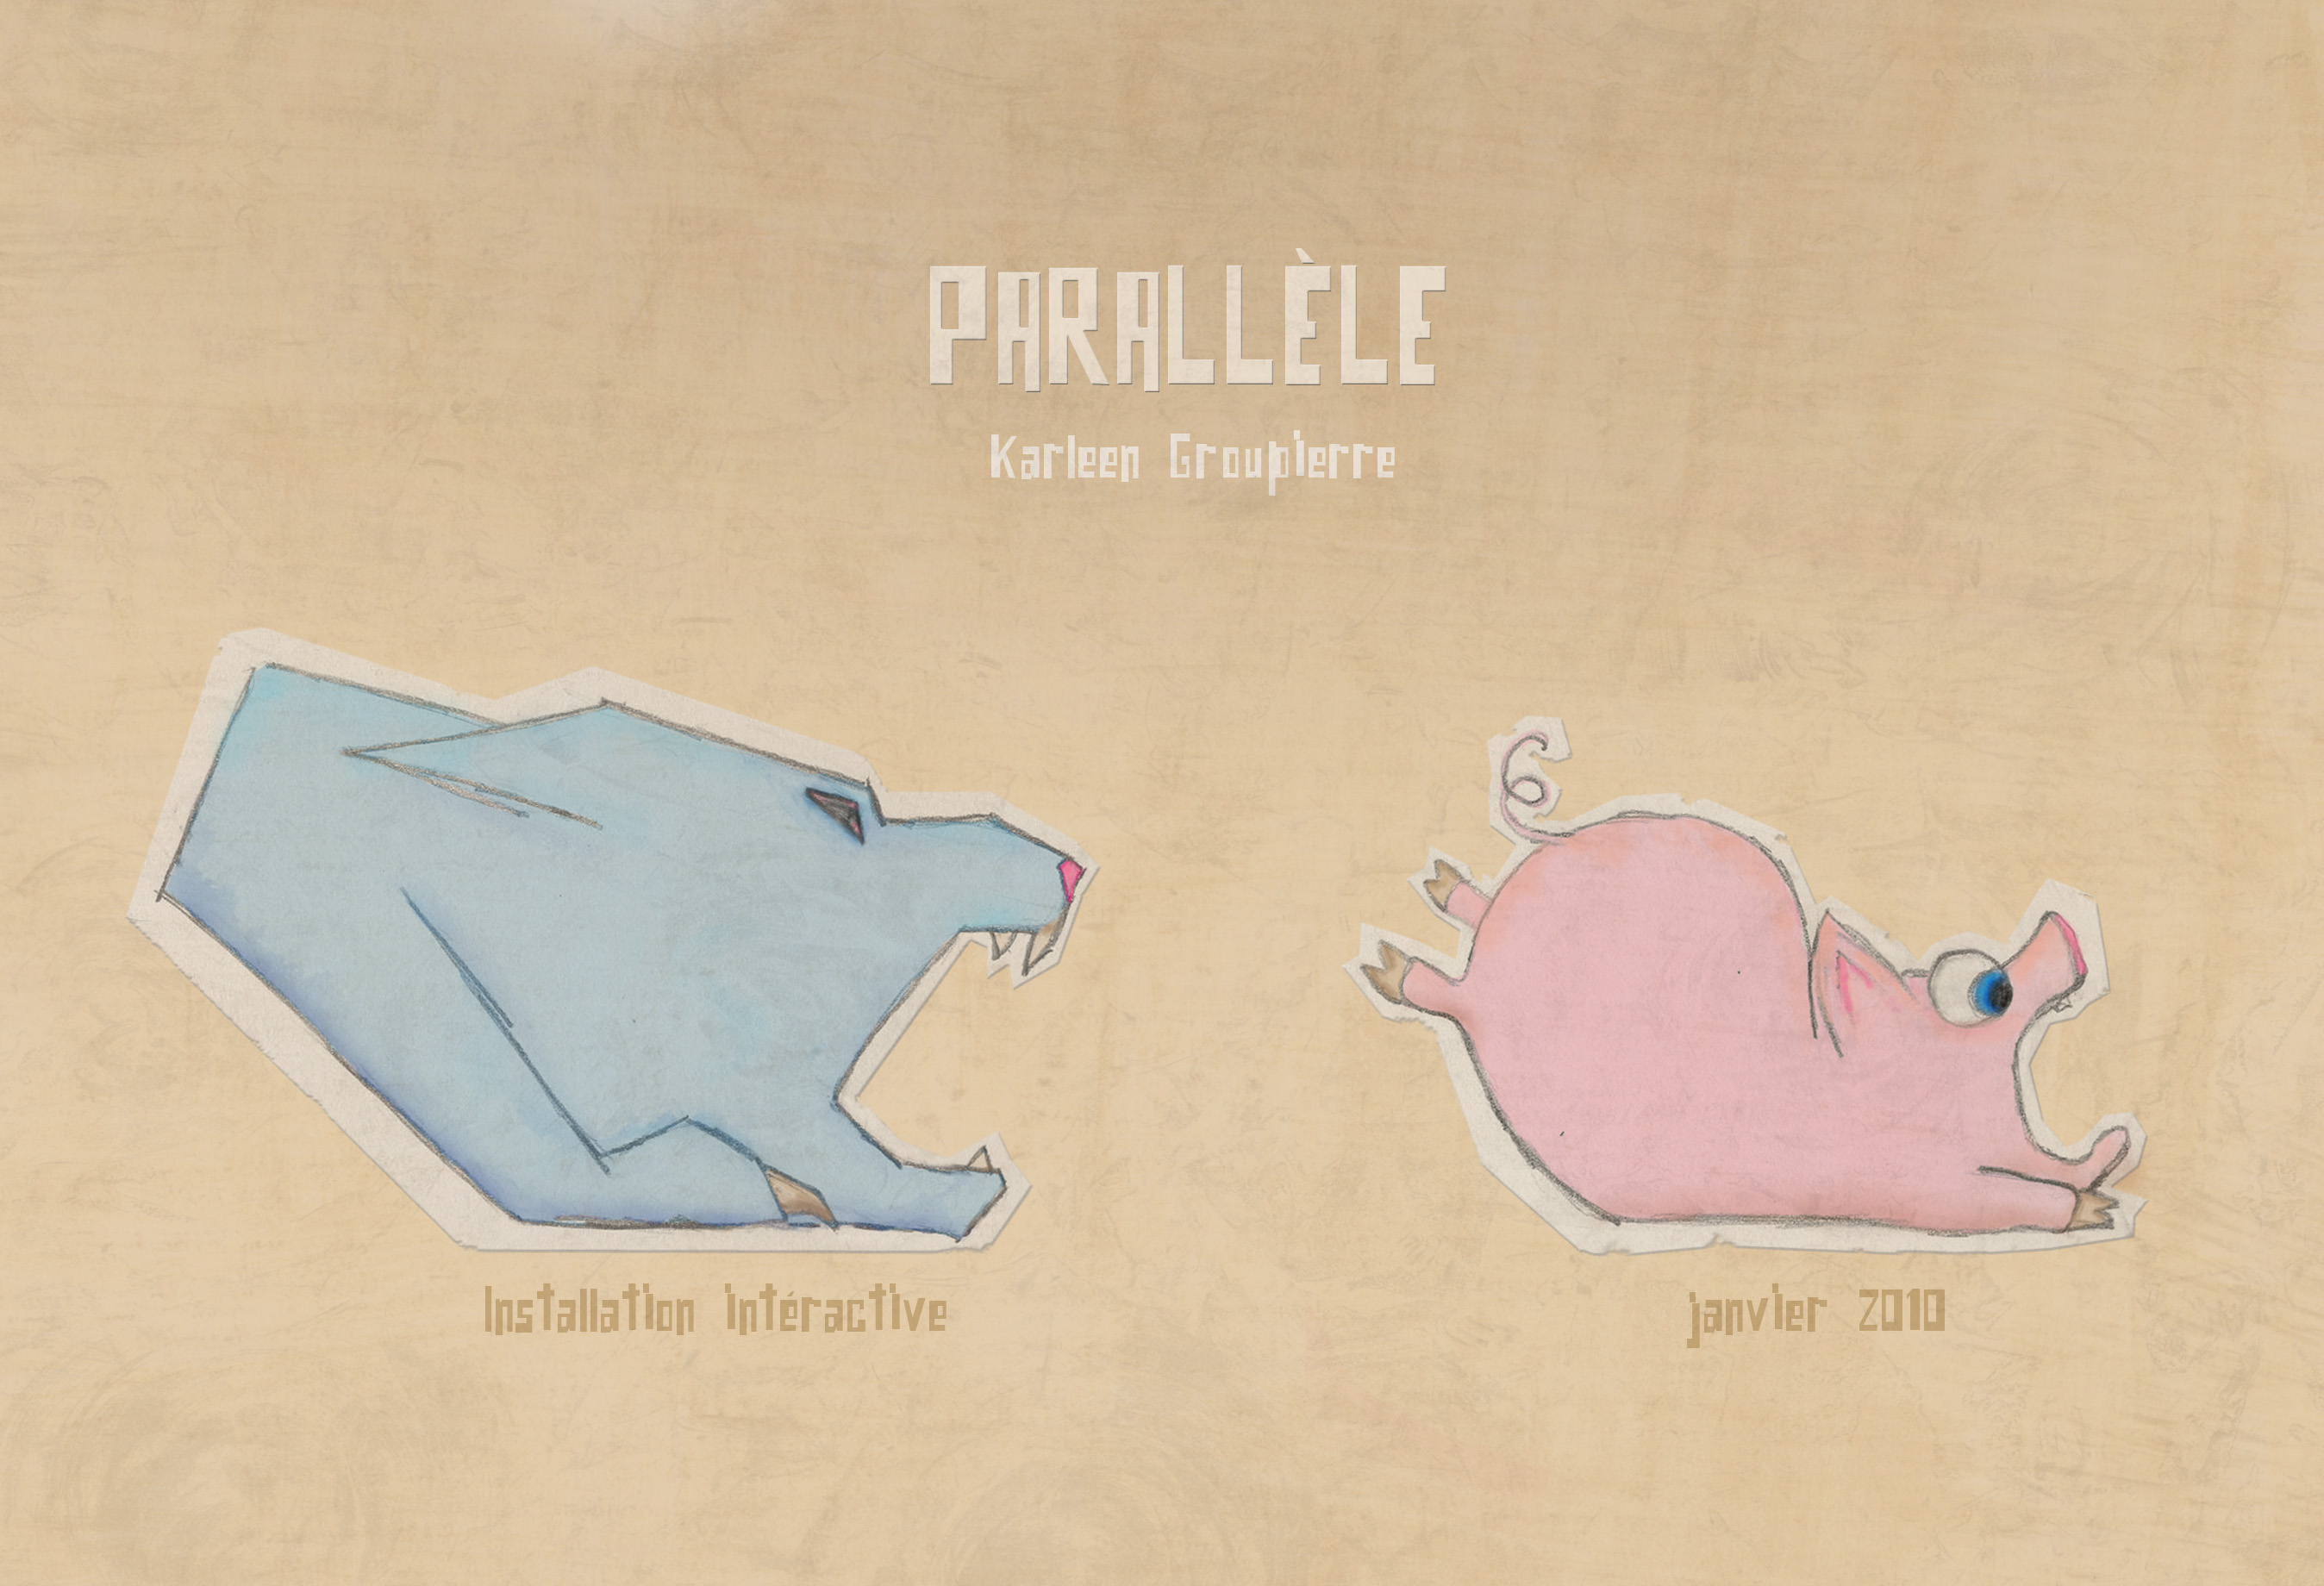 "Parallèle"  Game Augmented reality